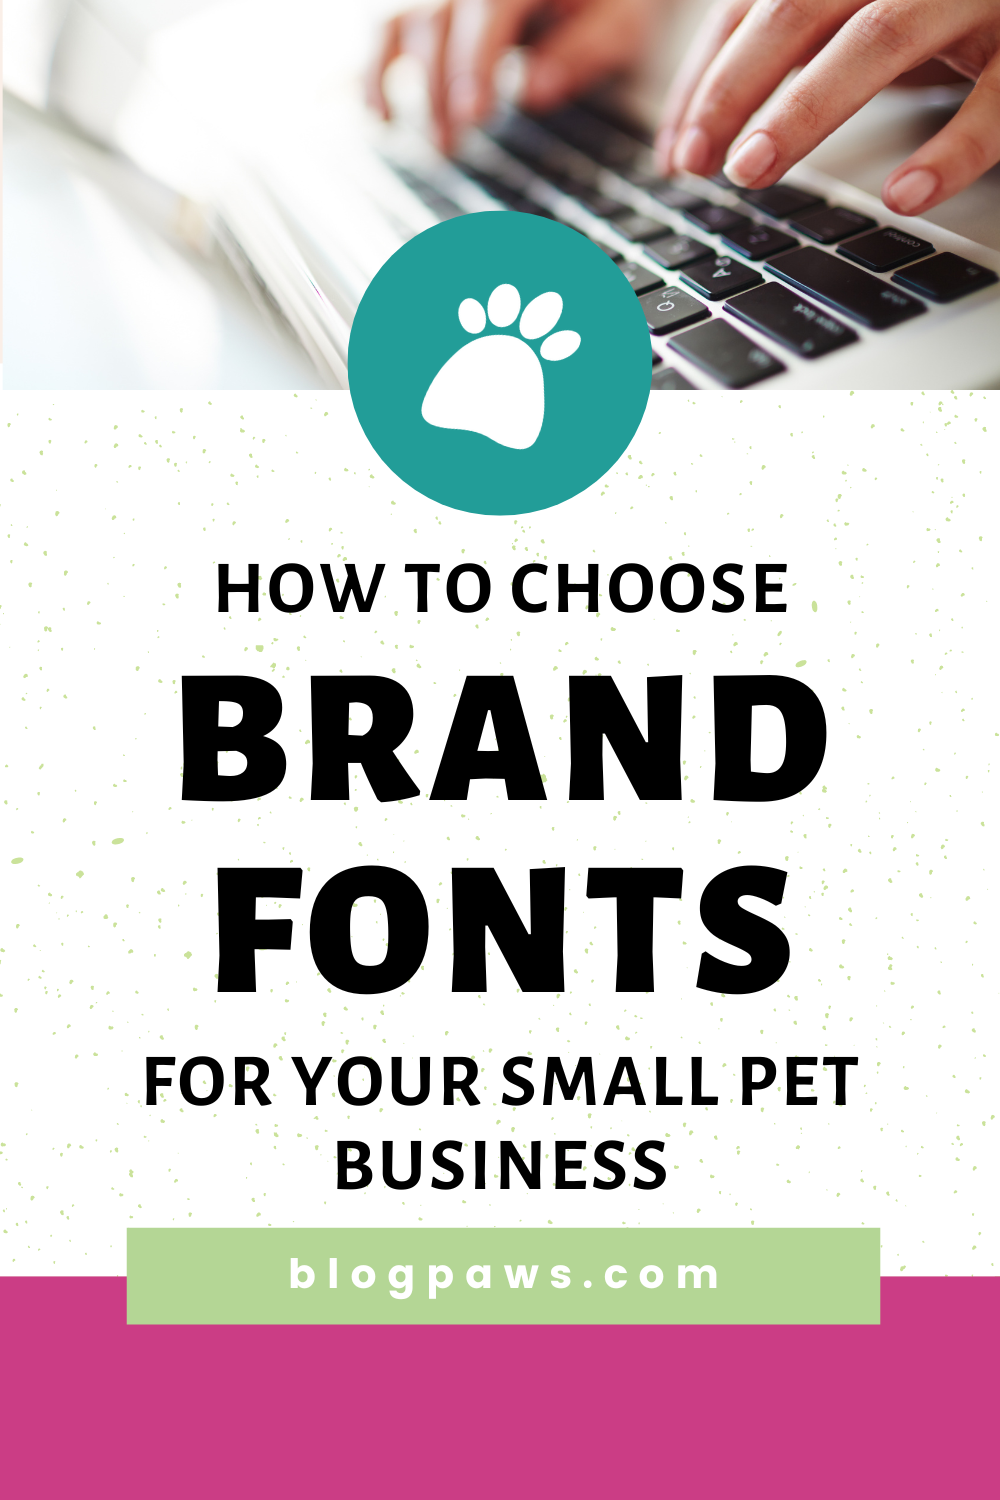 Why You Should Stop Using Instagram Fonts